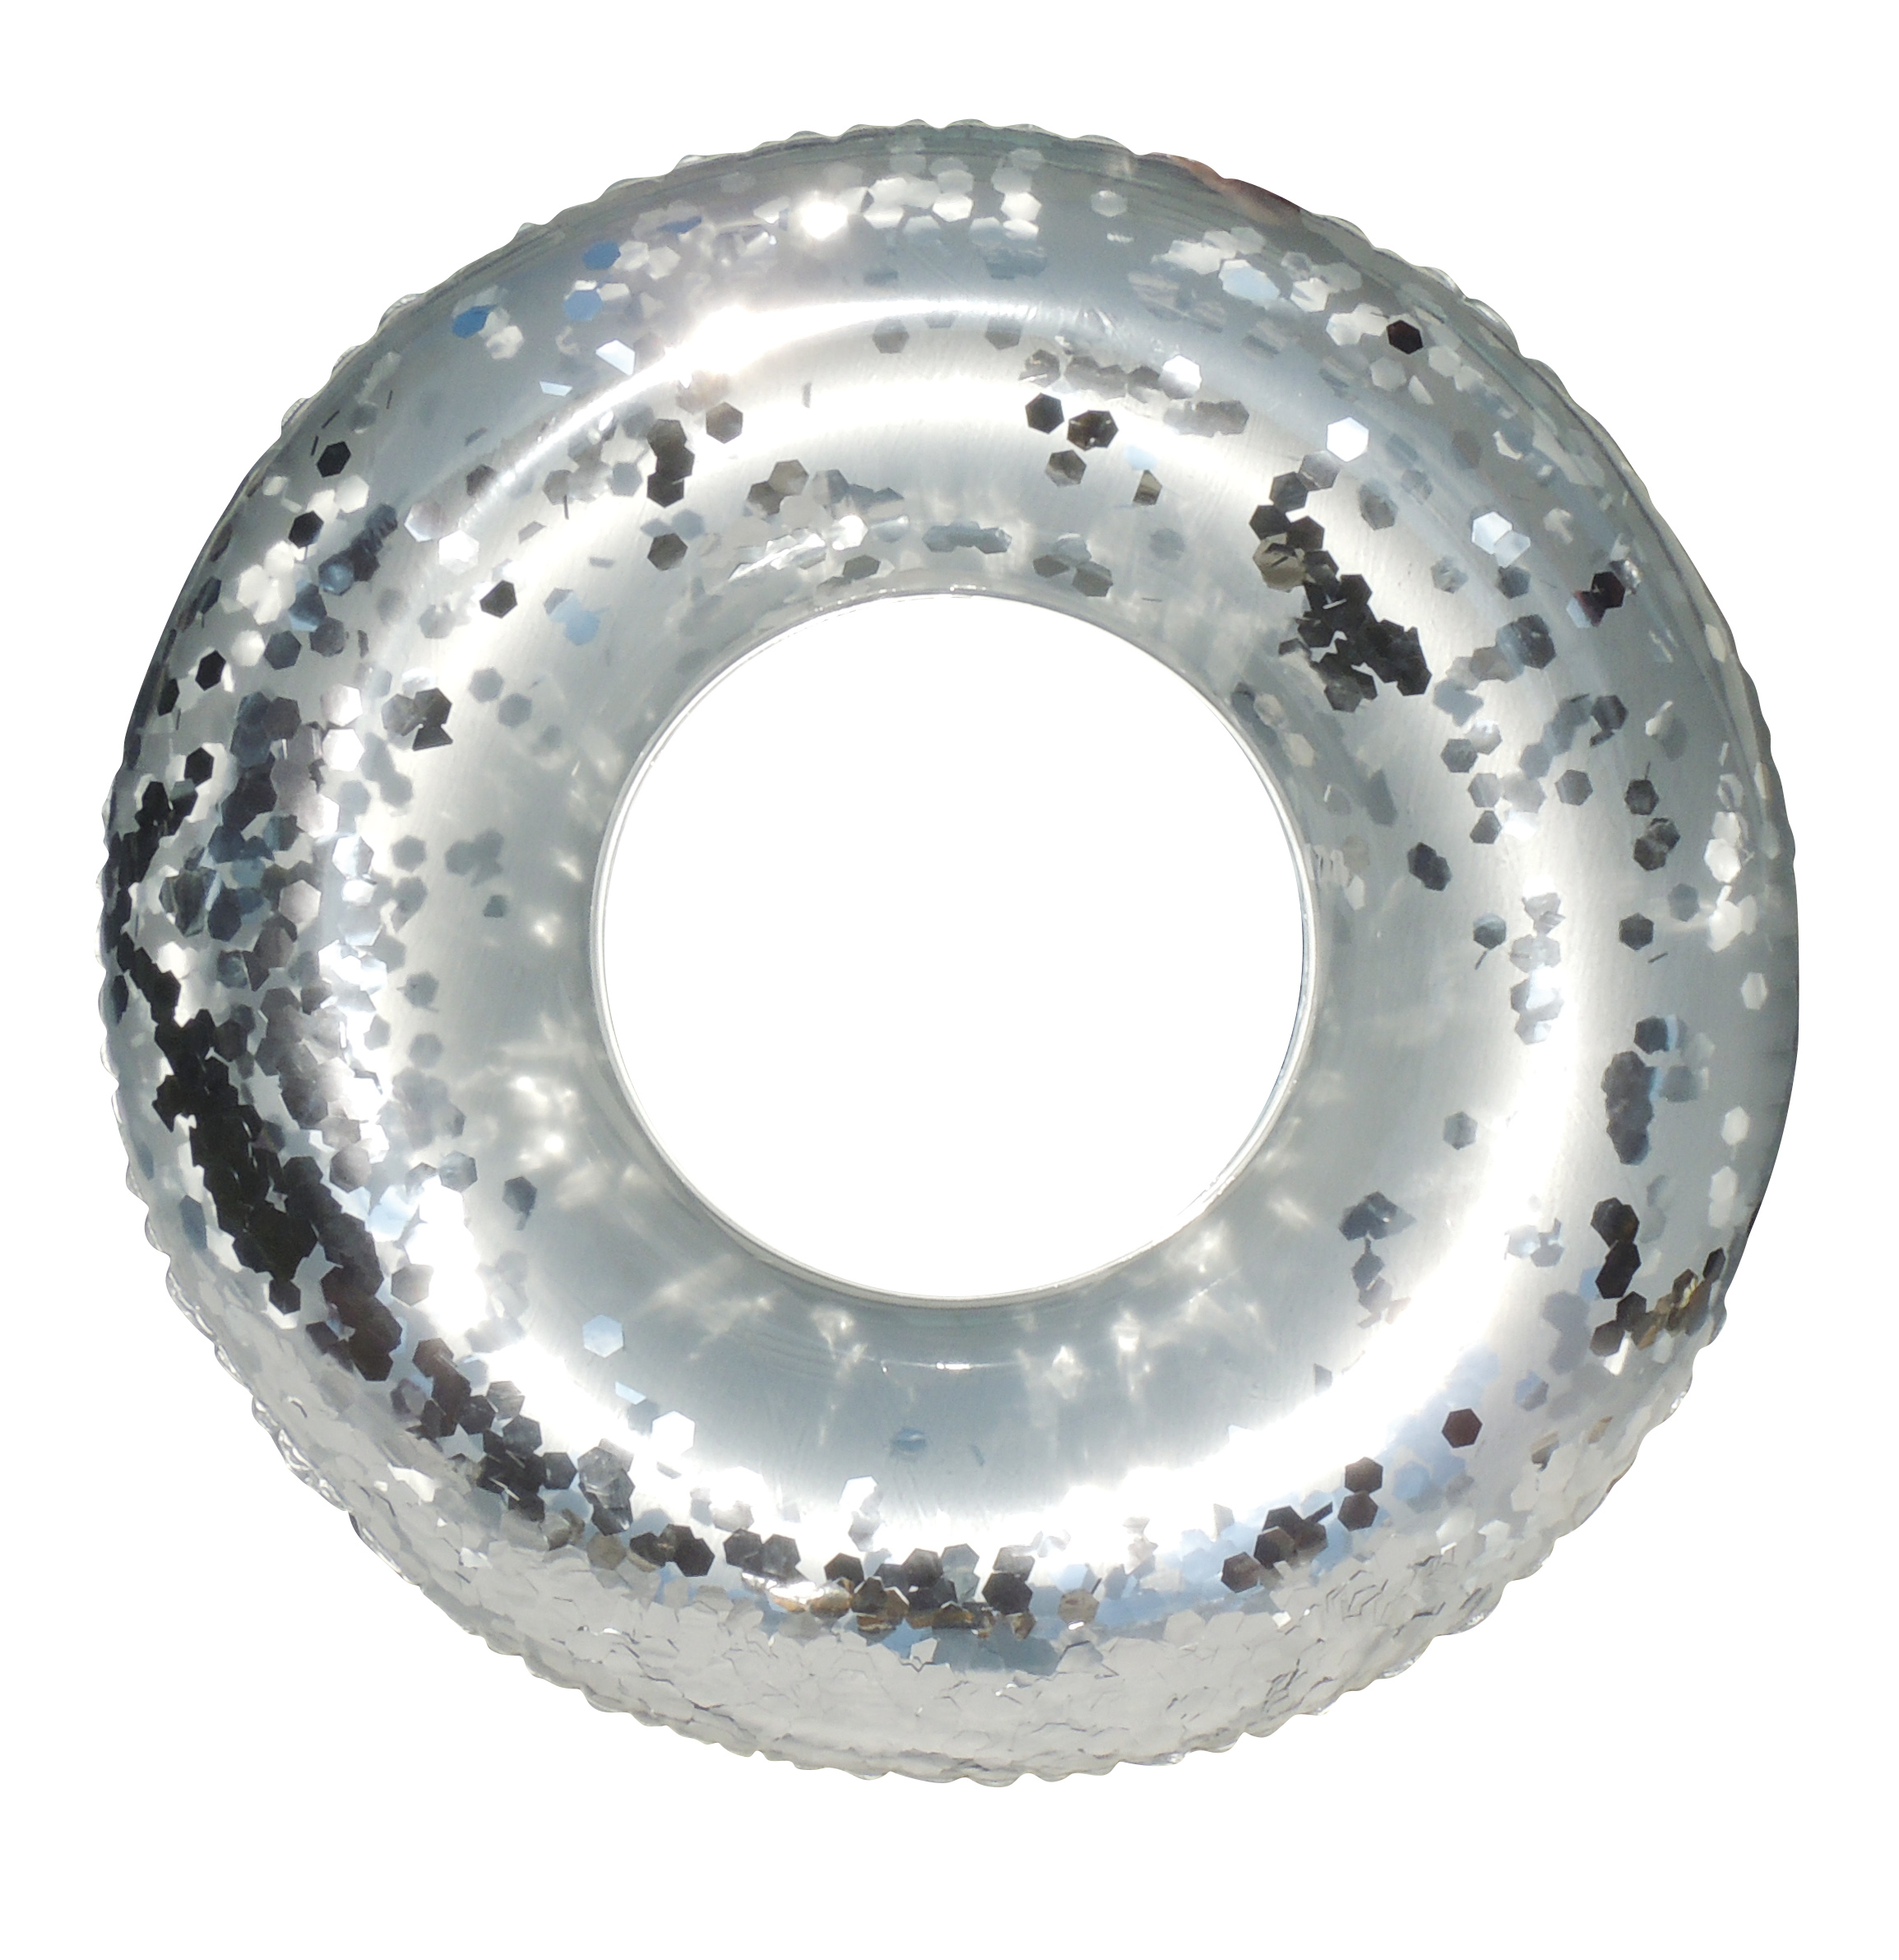 SILVER ONE Gaint Glitter Ring Luxury Adult/Kids Outdoor Inflatable Swimming Pool Water Raft Party Float Ride on Beach Toy | Summer Lounge Floatie - image 1 of 5